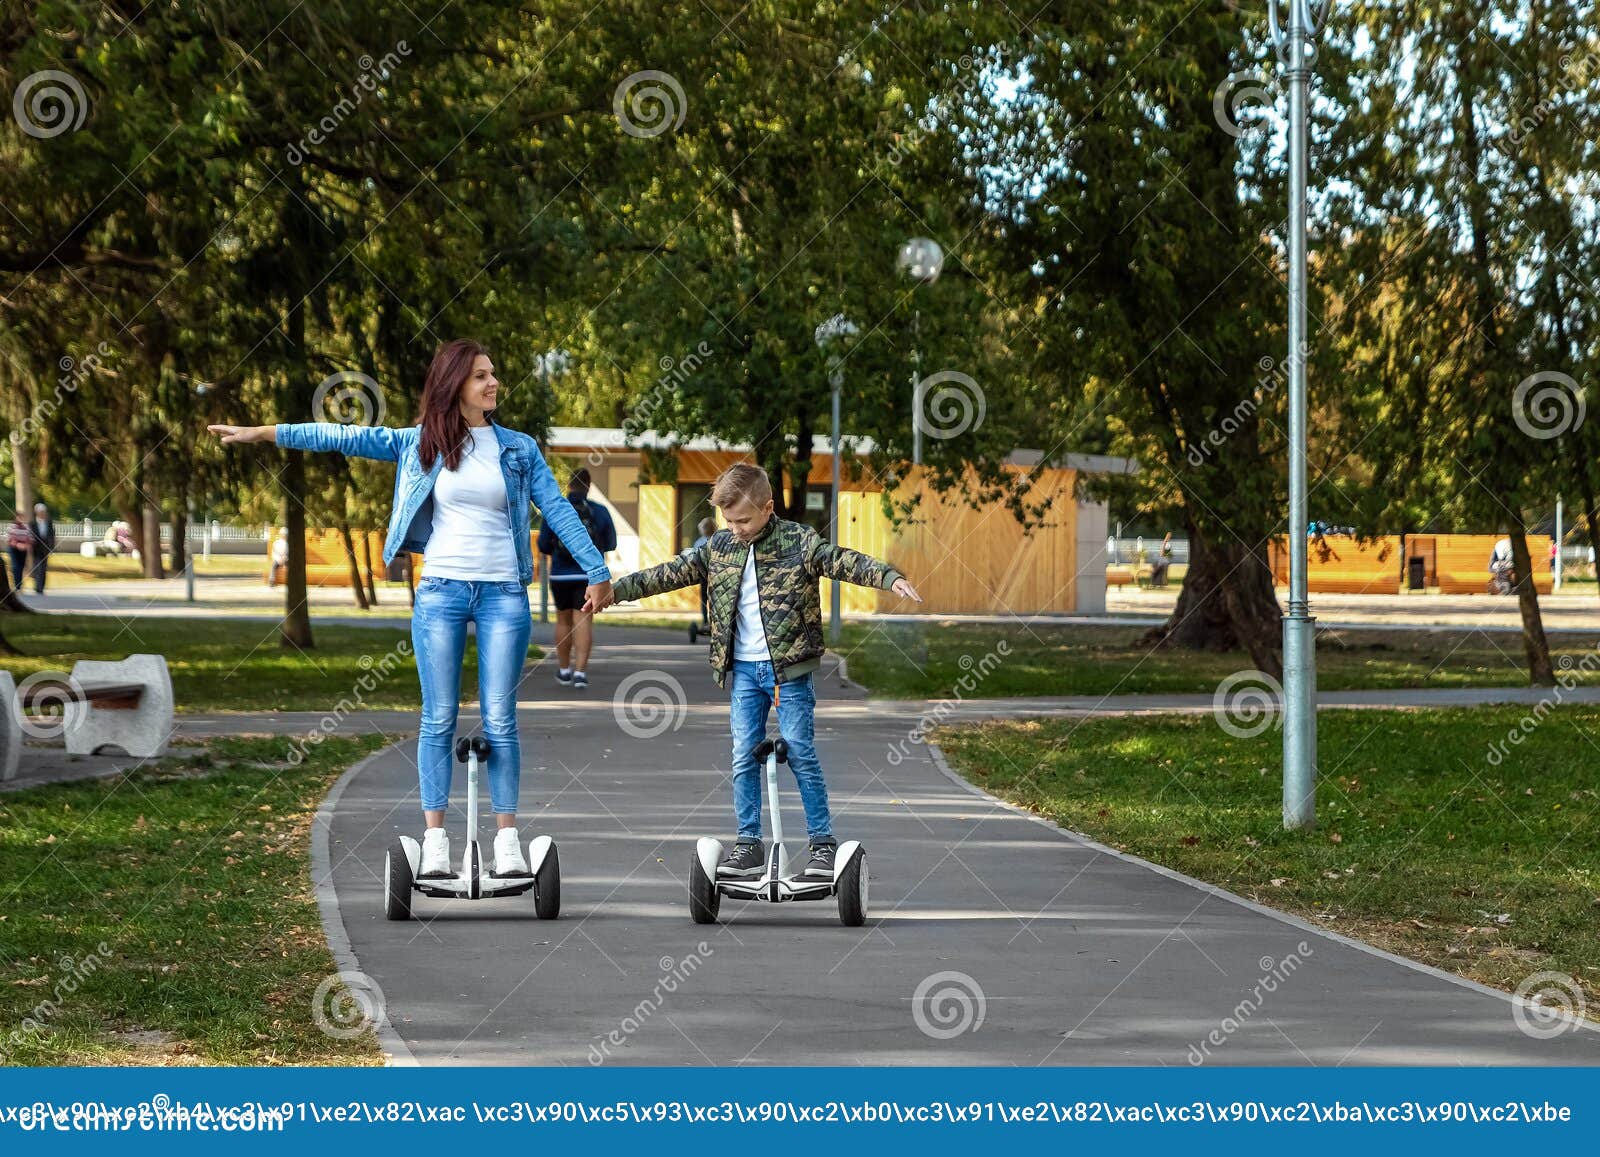 Oblongo Óxido Vacío Mom and Son Ride a Hoverboard in the Park, a Self-balancing Scooter. Active  Lifestyle Time with Baby Technology Future Stock Image - Image of girl,  lifestyle: 158661885